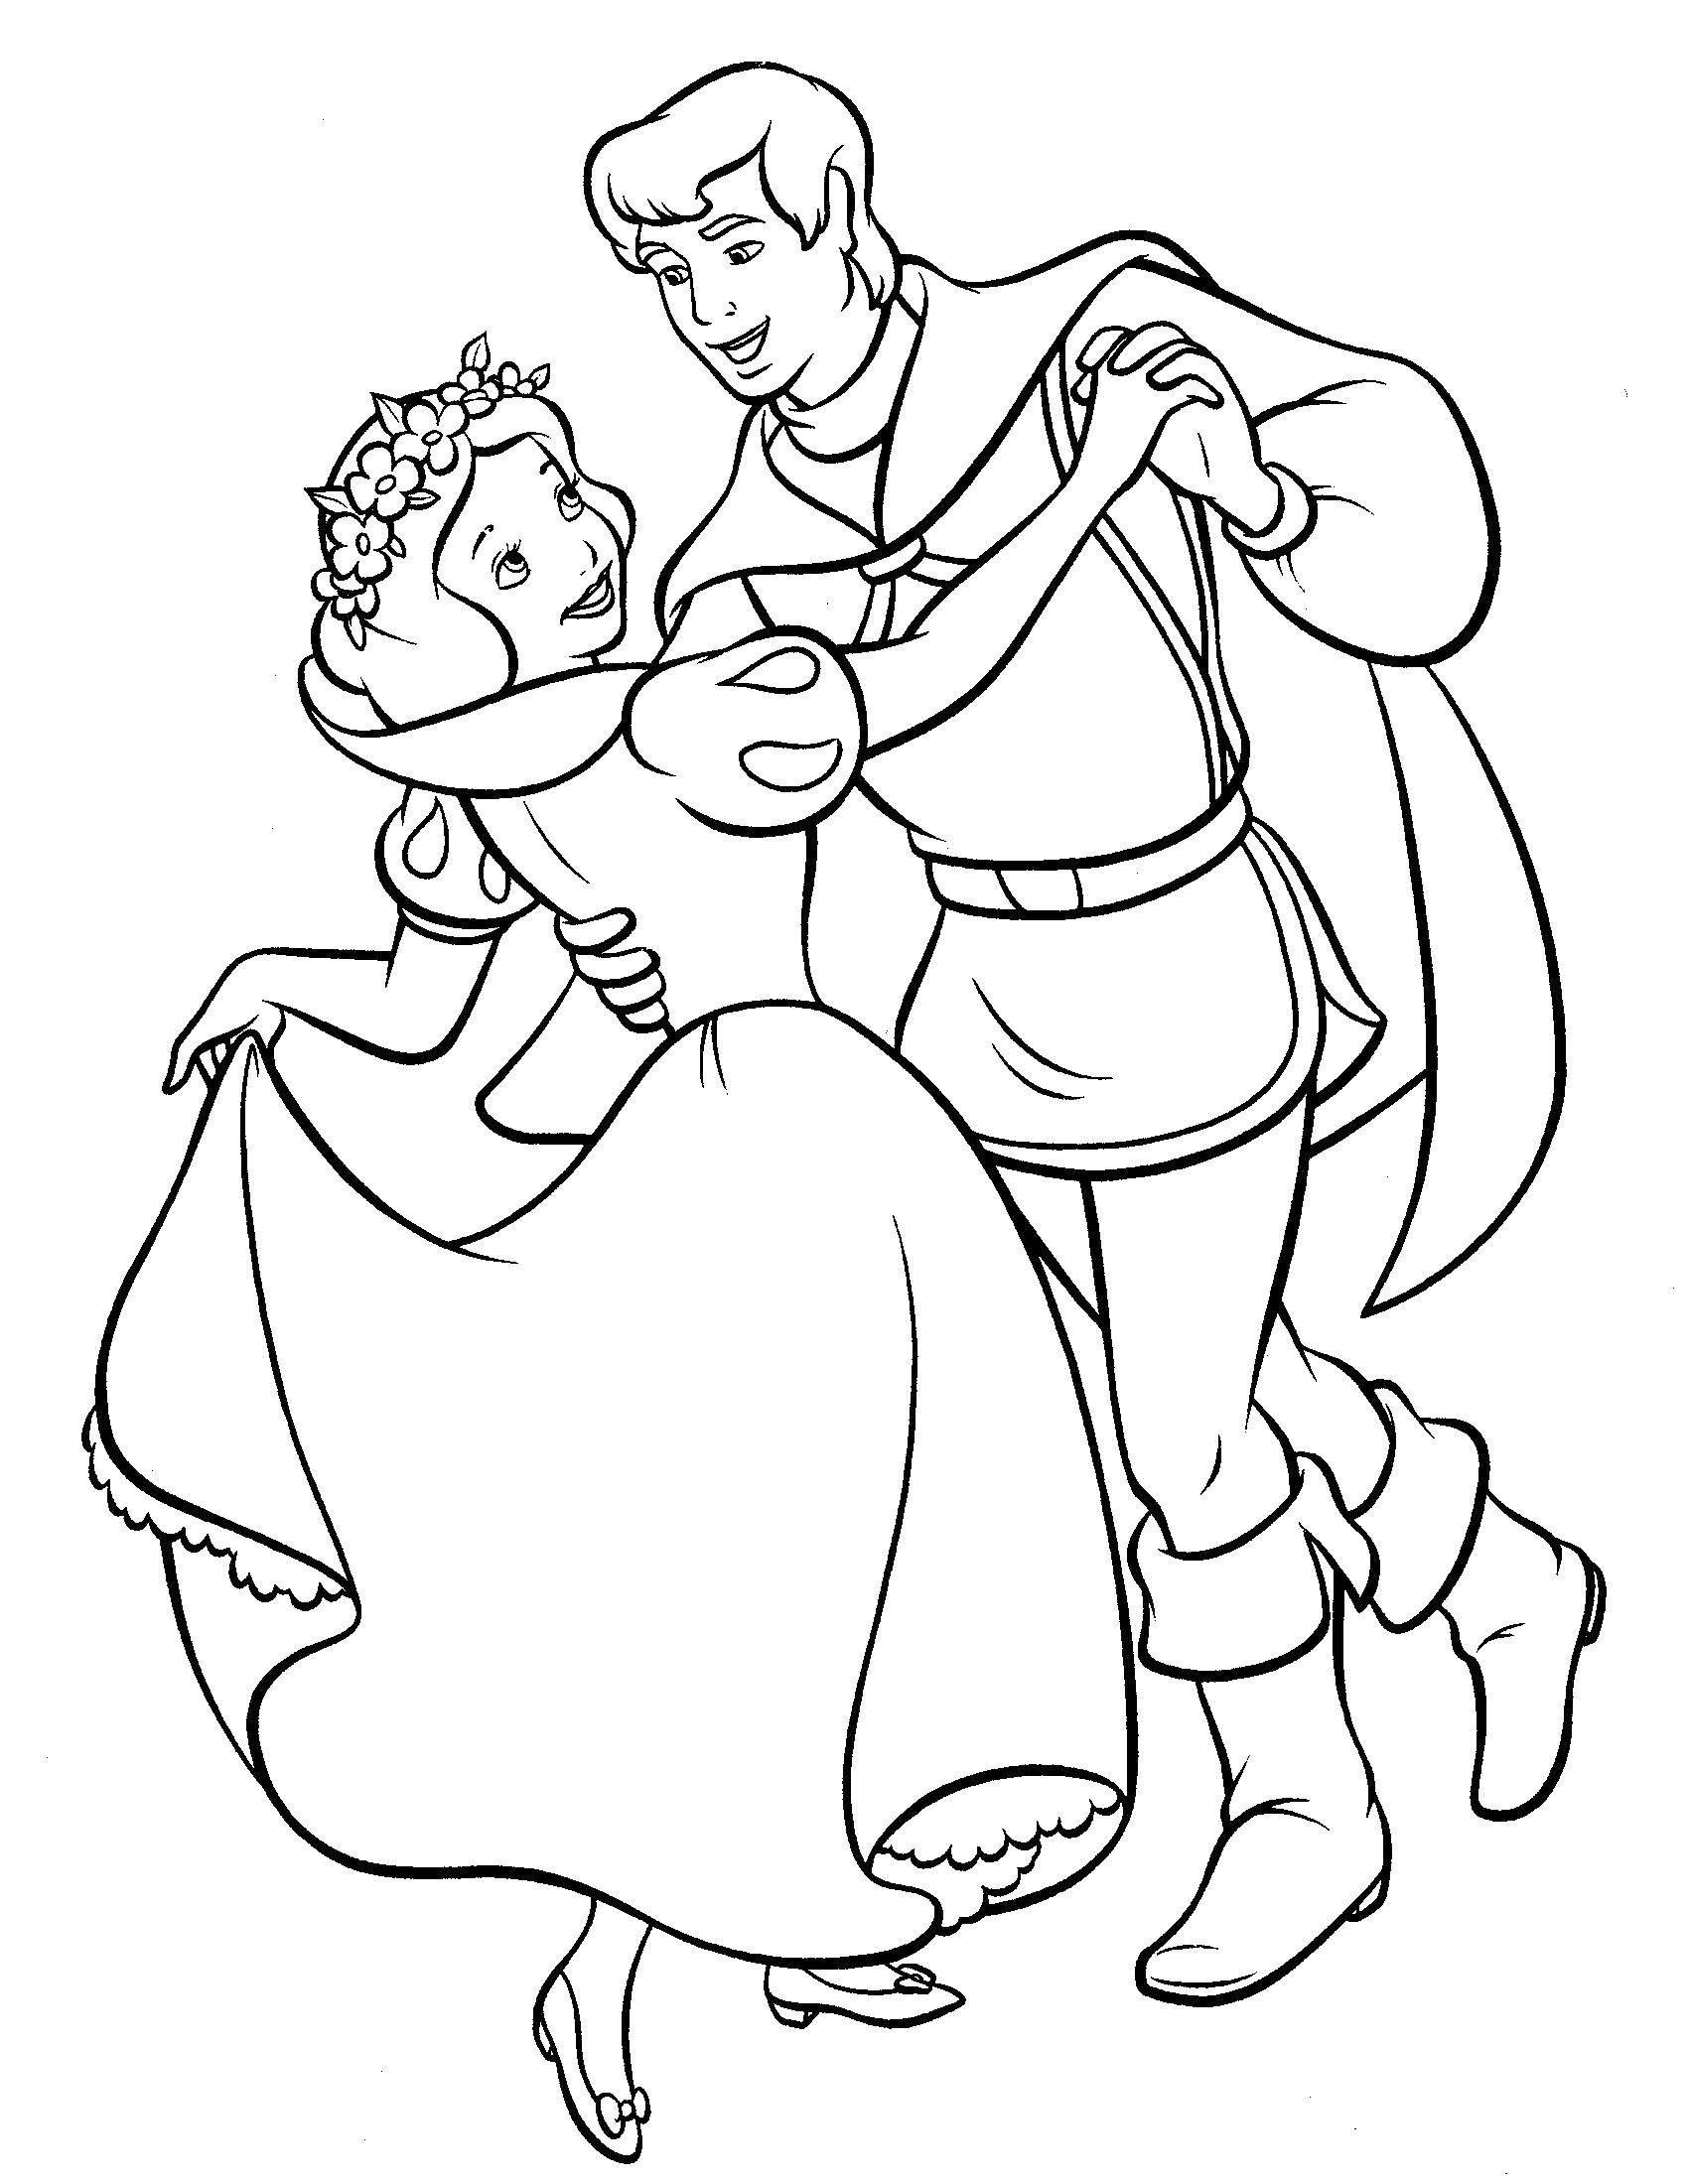 Coloring Snow white dancing with Prince. Category snow white. Tags:  Snow white, princesses, cartoons, fairy tales.